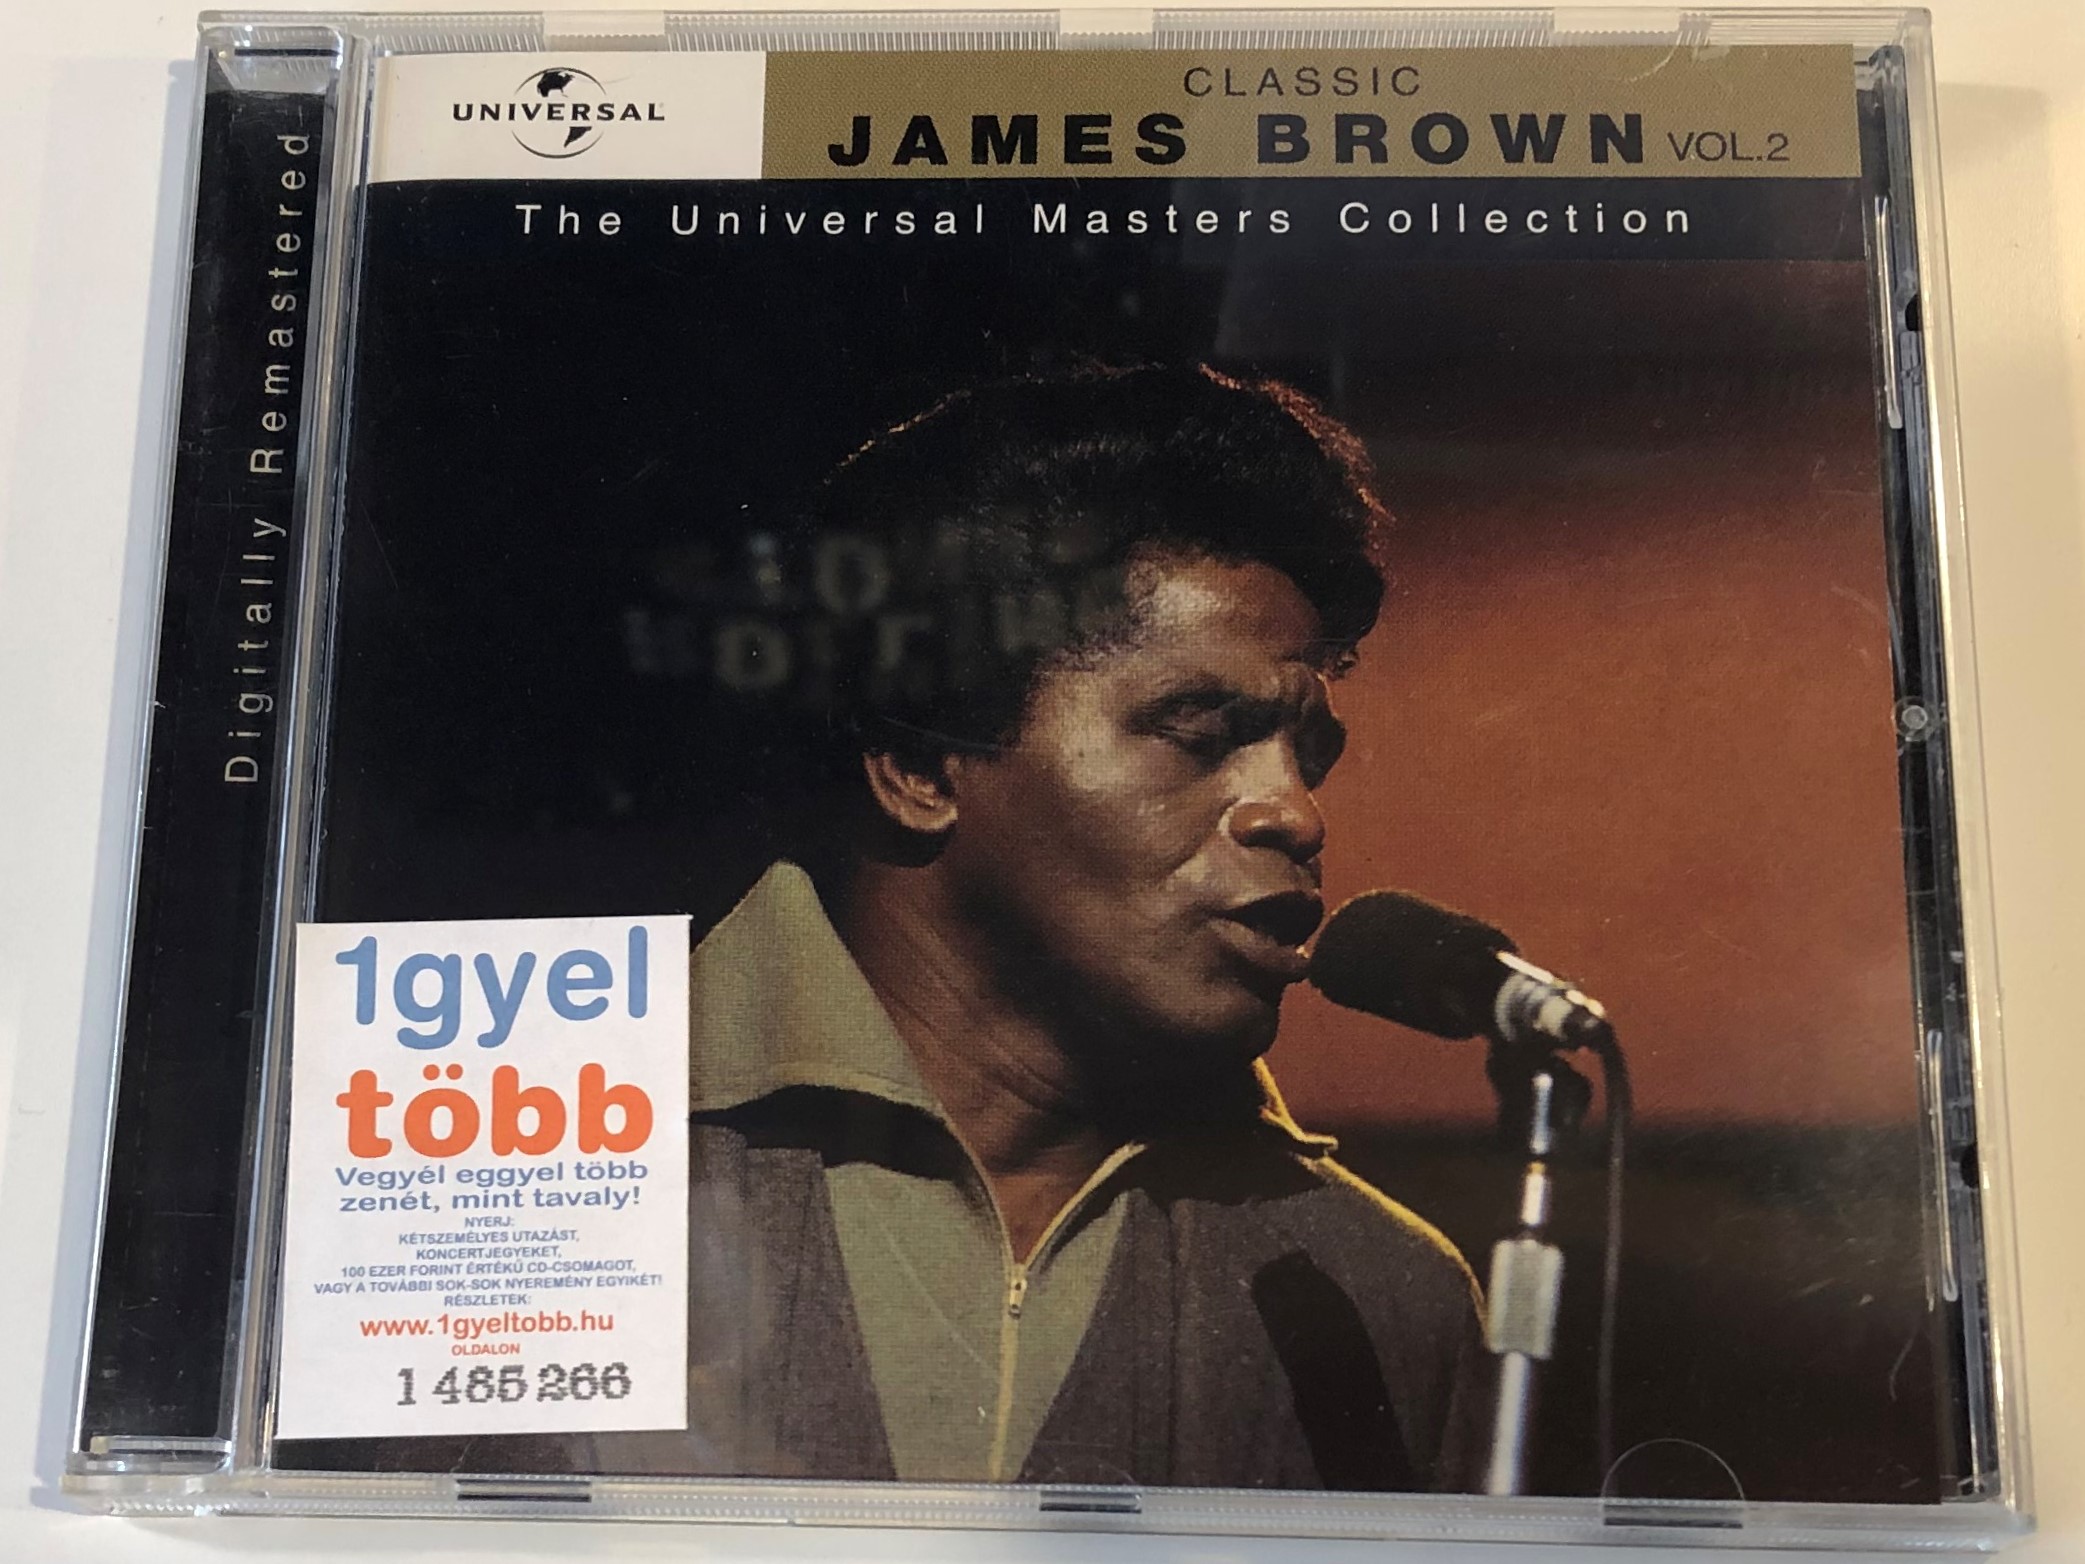 james-brown-classic-vol.2-the-universal-masters-collection-polydor-audio-cd-2003-589-961-2-1-.jpg